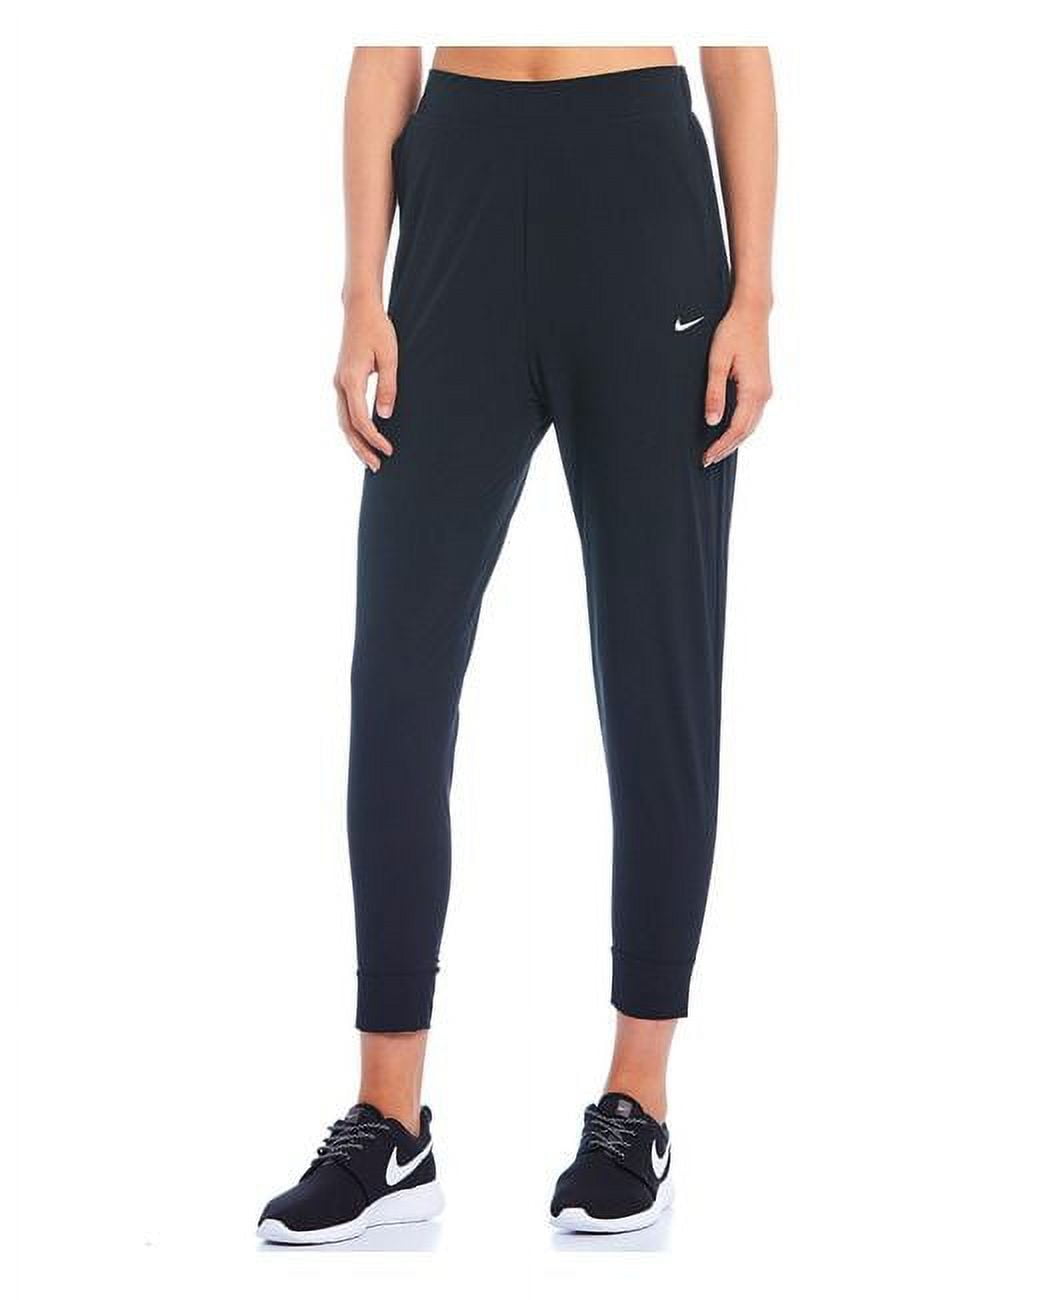 Nike Women's Bliss Victory Slim Fit Training Pants, Navy, Large - NEW 